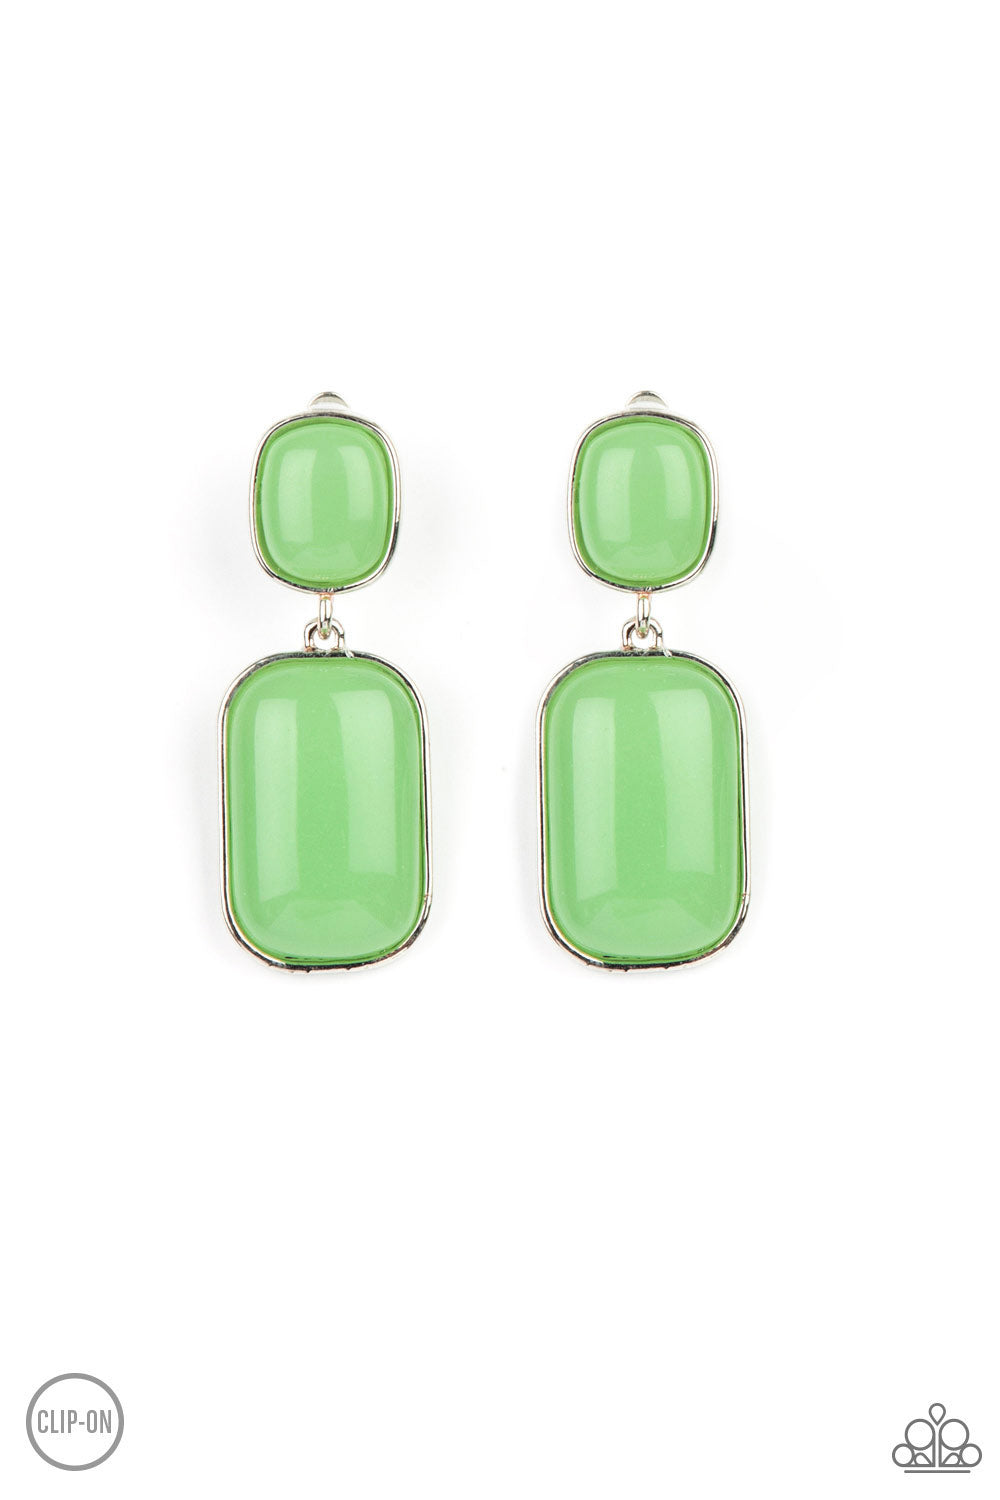 Paparazzi Meet Me At The Plaza Green Clip-On Earrings - P5CO-GRXX-012XX